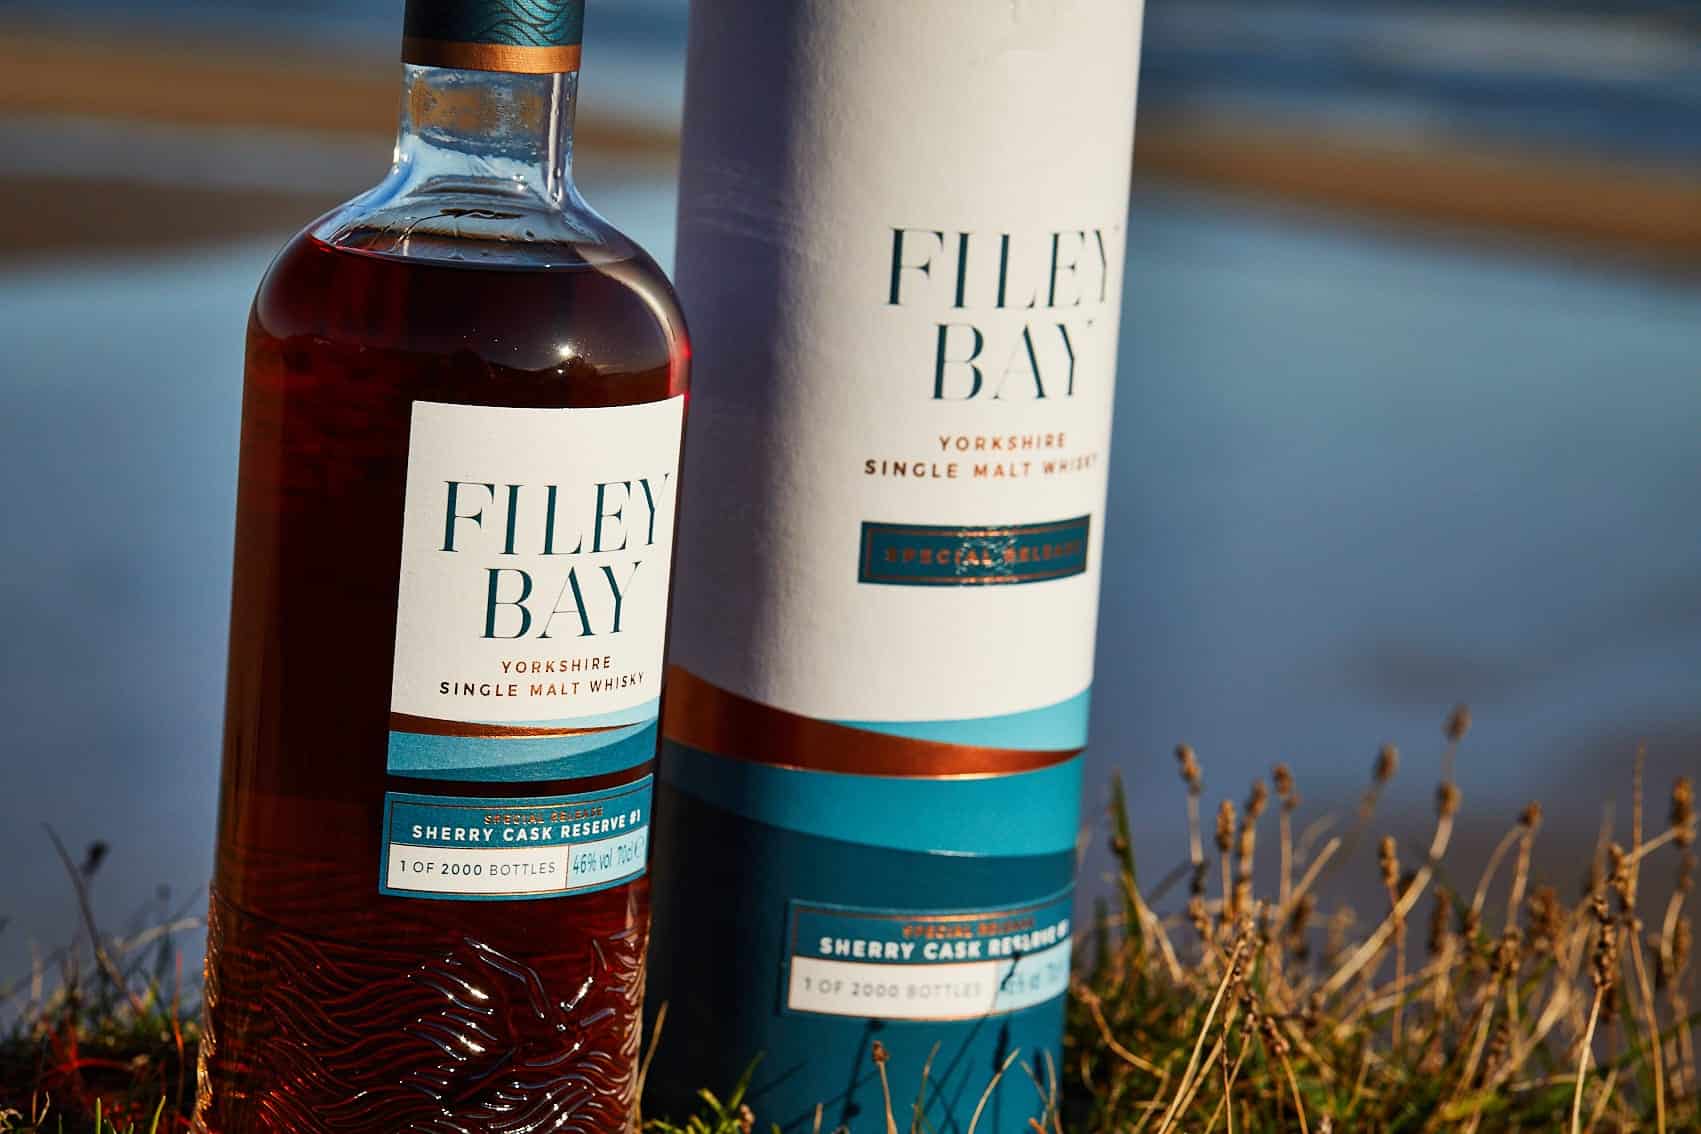 Filey Bay Sherry Cask Reserve #1 on the beach!